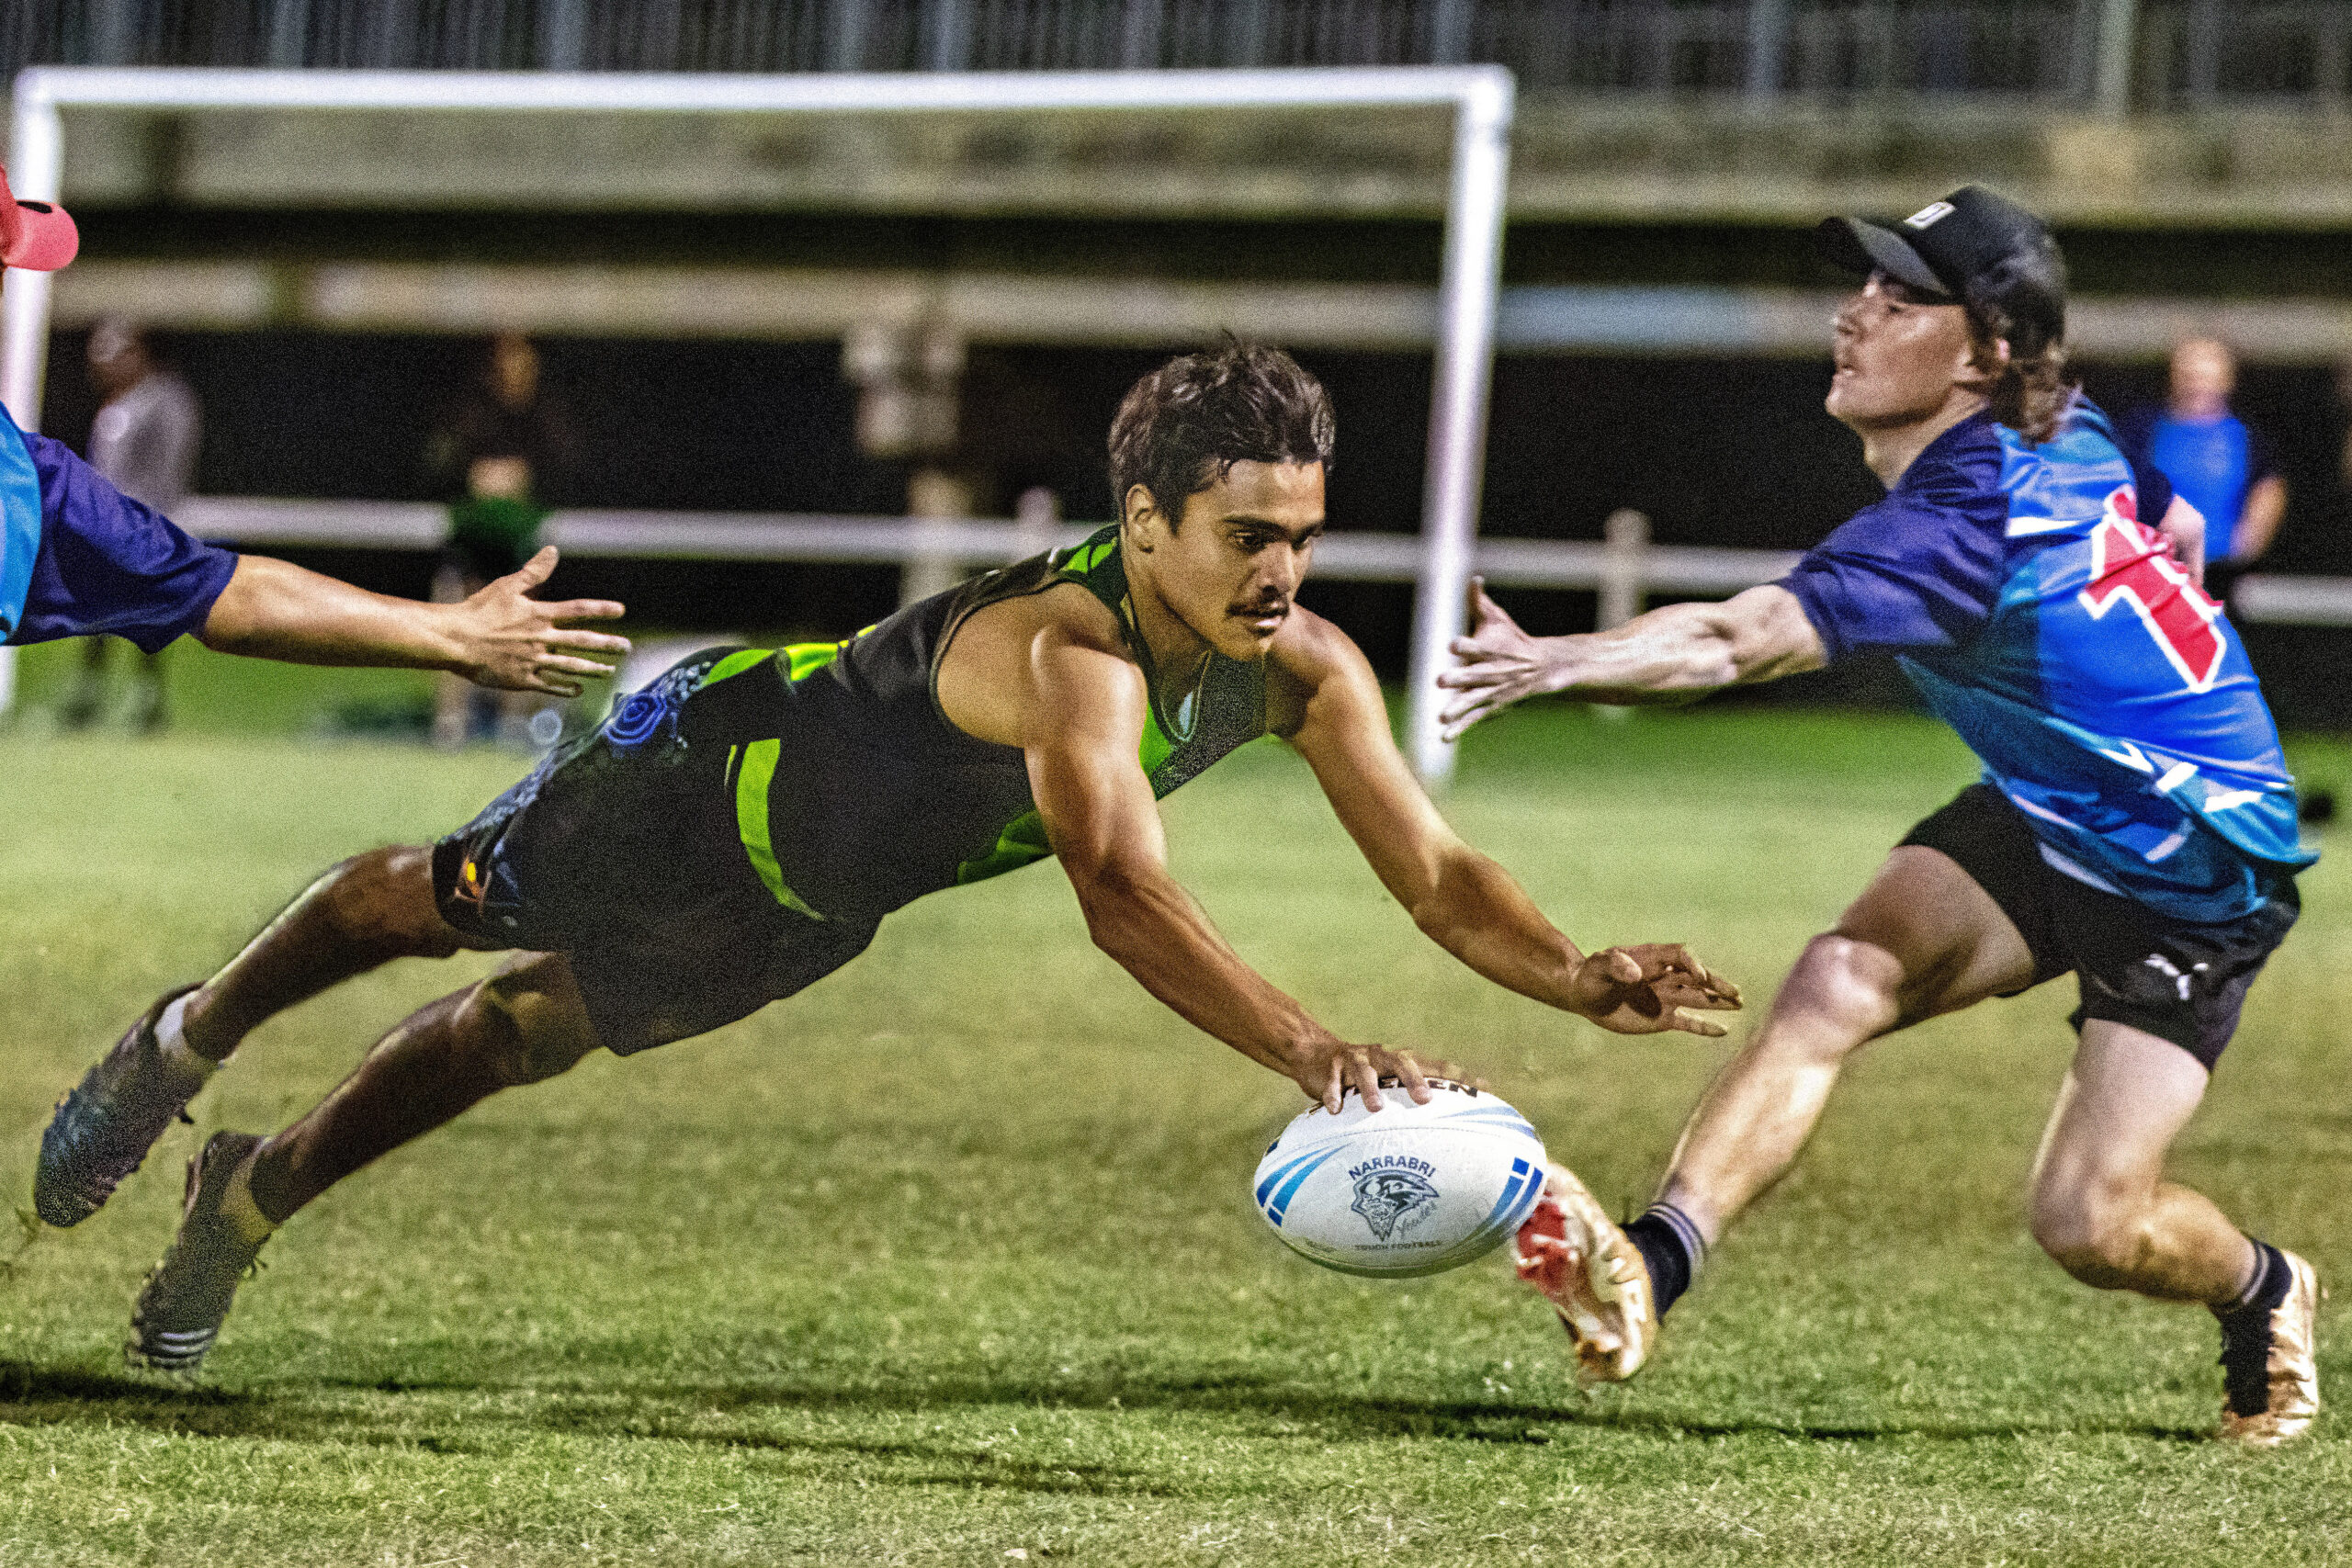 Narrabri Touch’s mixed competition grand finalists locked in